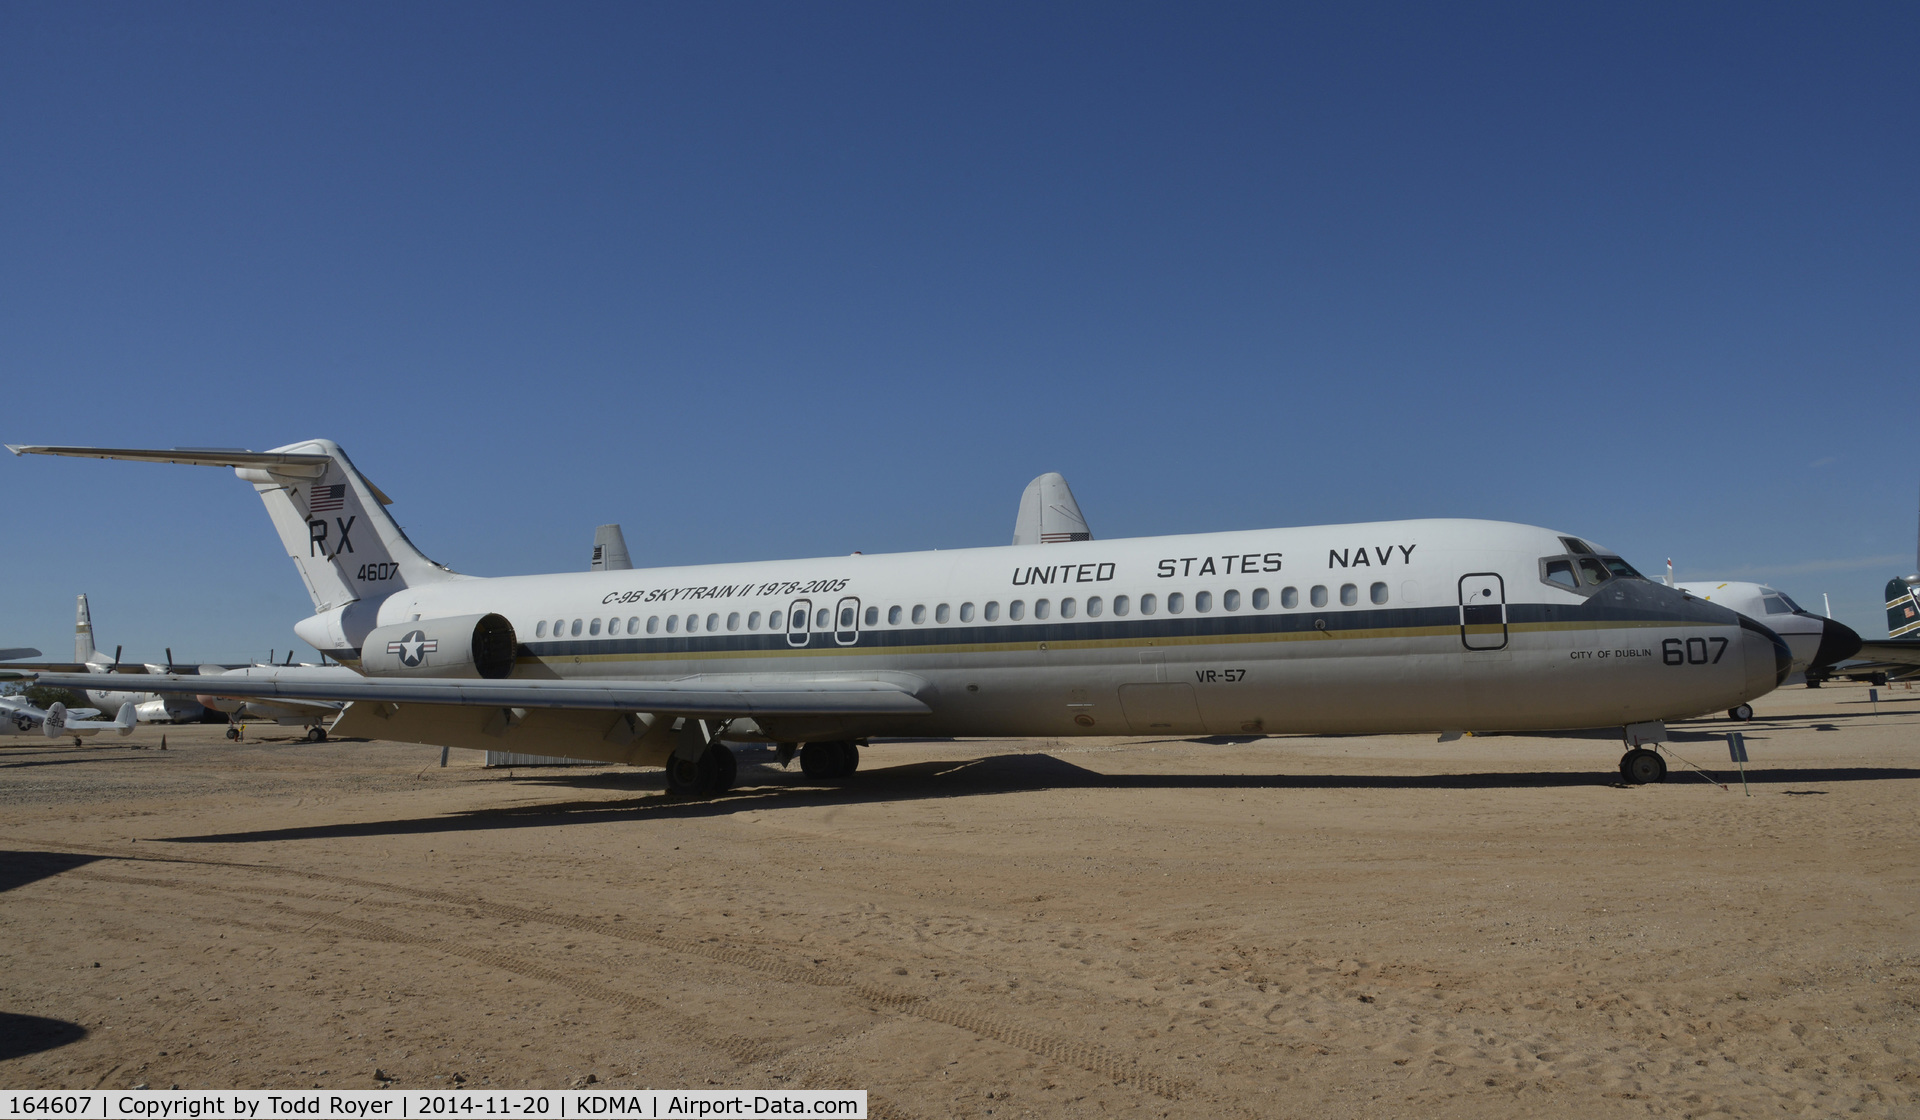 164607, 1972 McDonnell Douglas C-9B Skytrain II C/N 47428, On display at the Pima Air and Space Museum